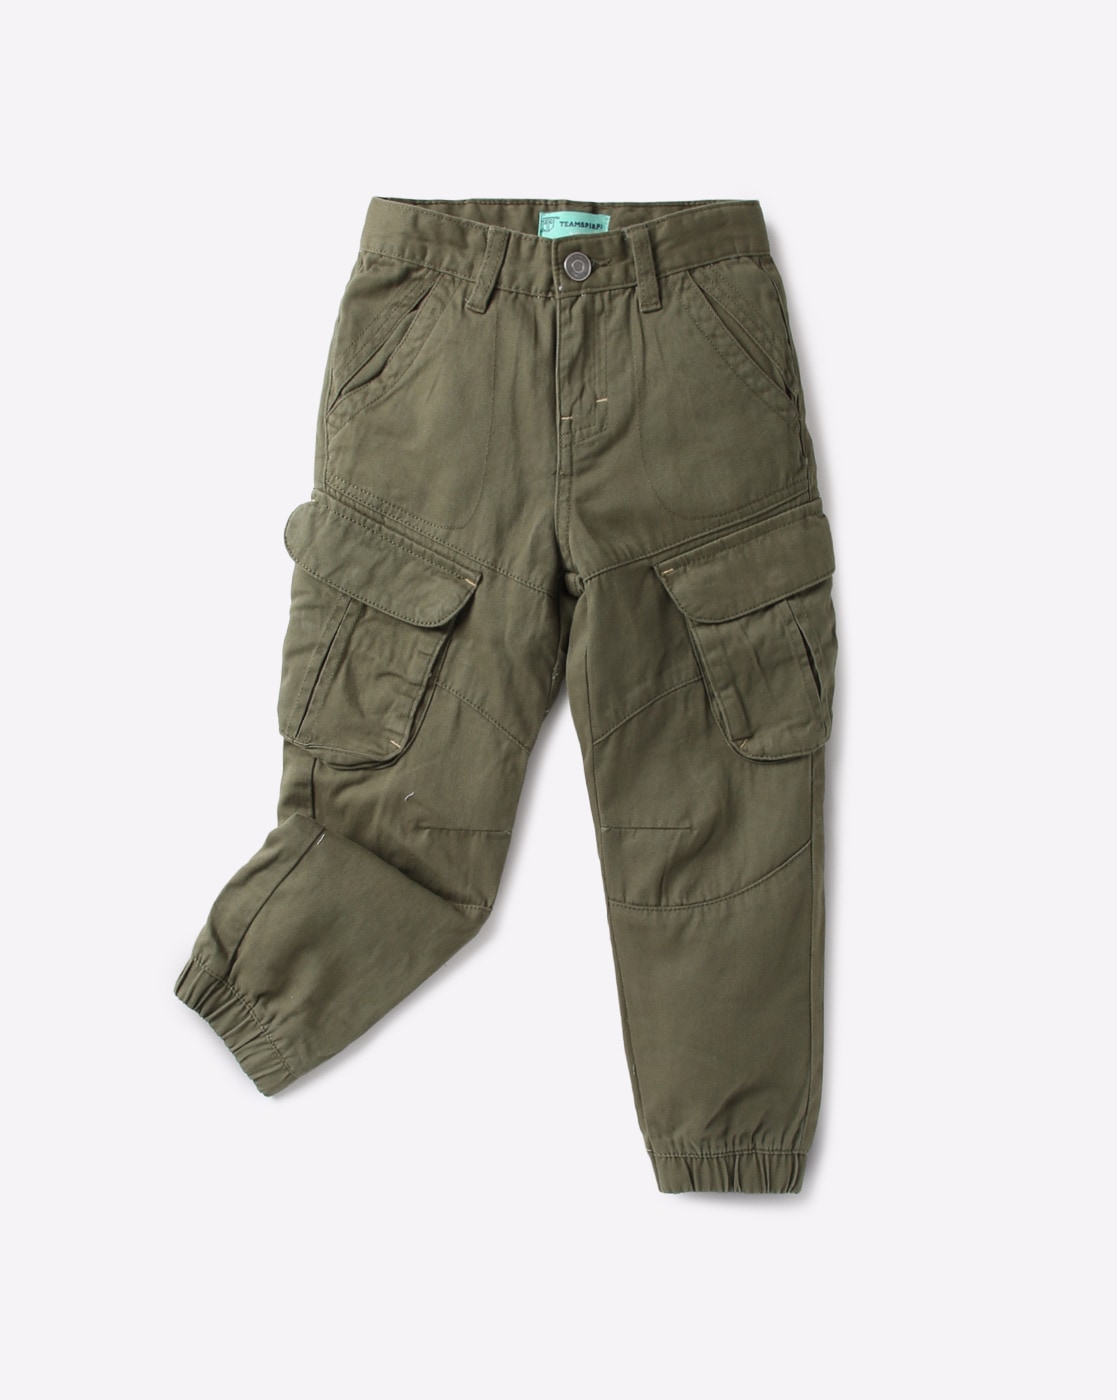 Spring Kids Boys Cargo Pants With Letter Pocket Straight Full Pant Bottom  For Boys, Casual And Comfortable LJ201127 From Cong05, $14.33 | DHgate.Com